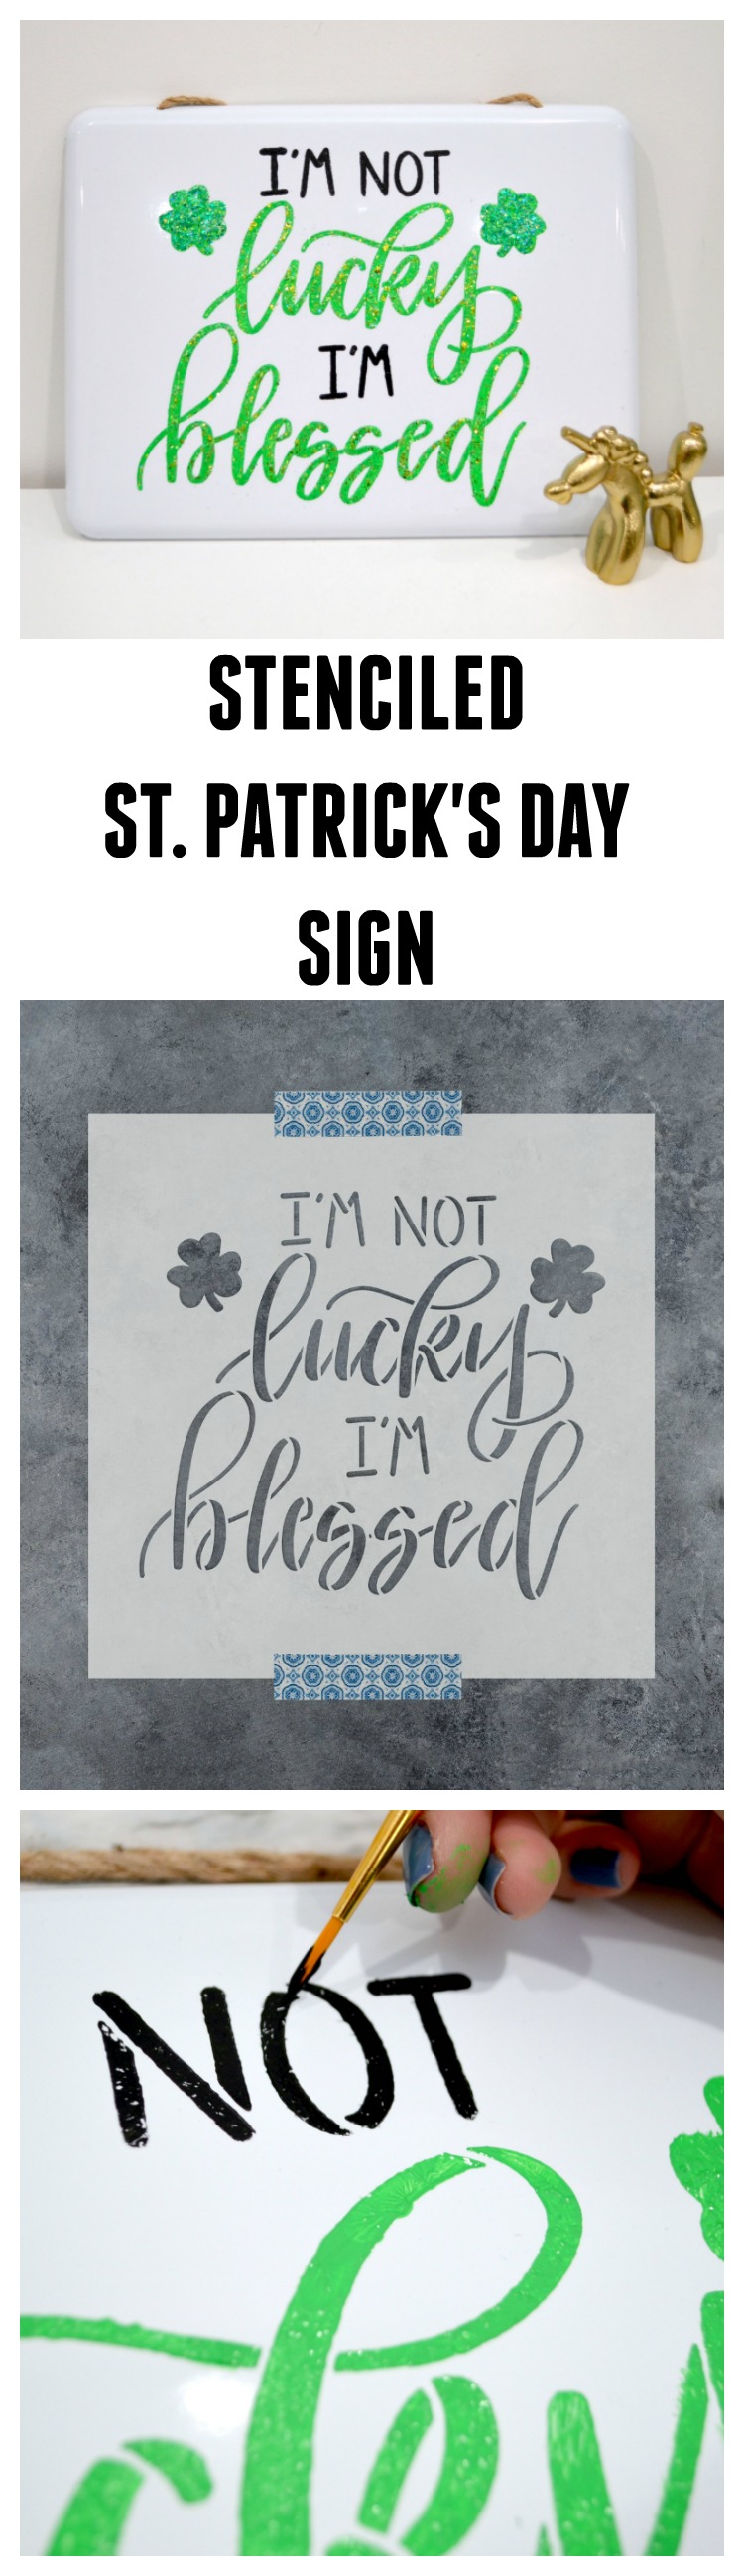 St. Patrick's Day Sign with Amy Latta Stencils